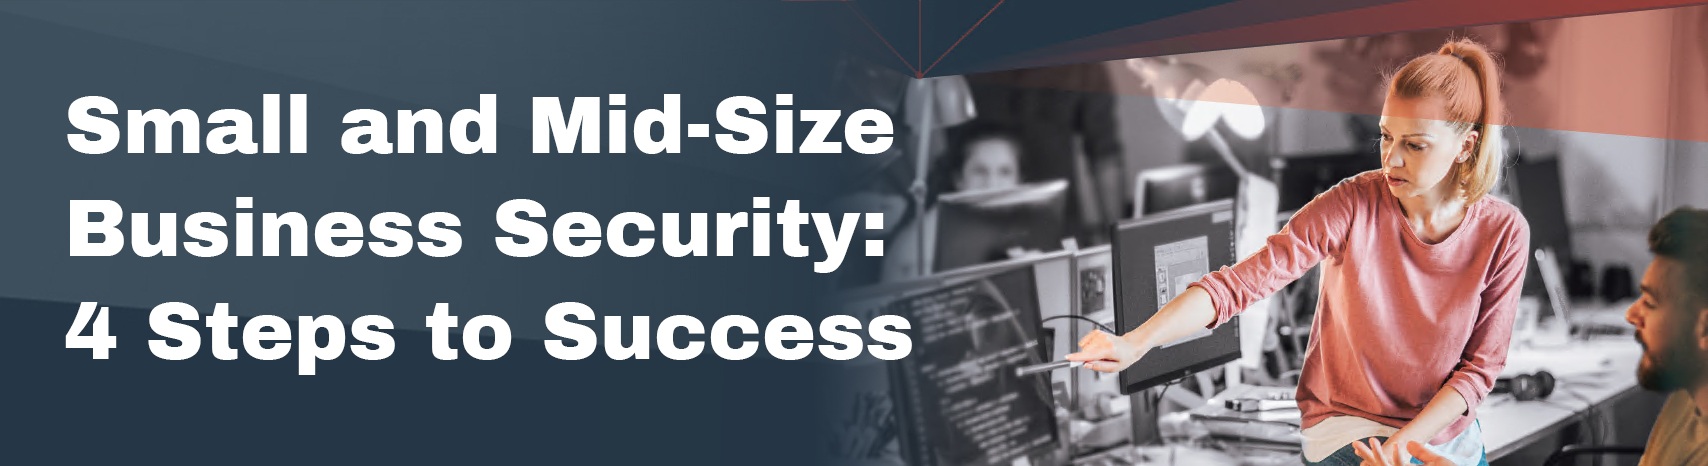 Small and Mid-Size Business Security